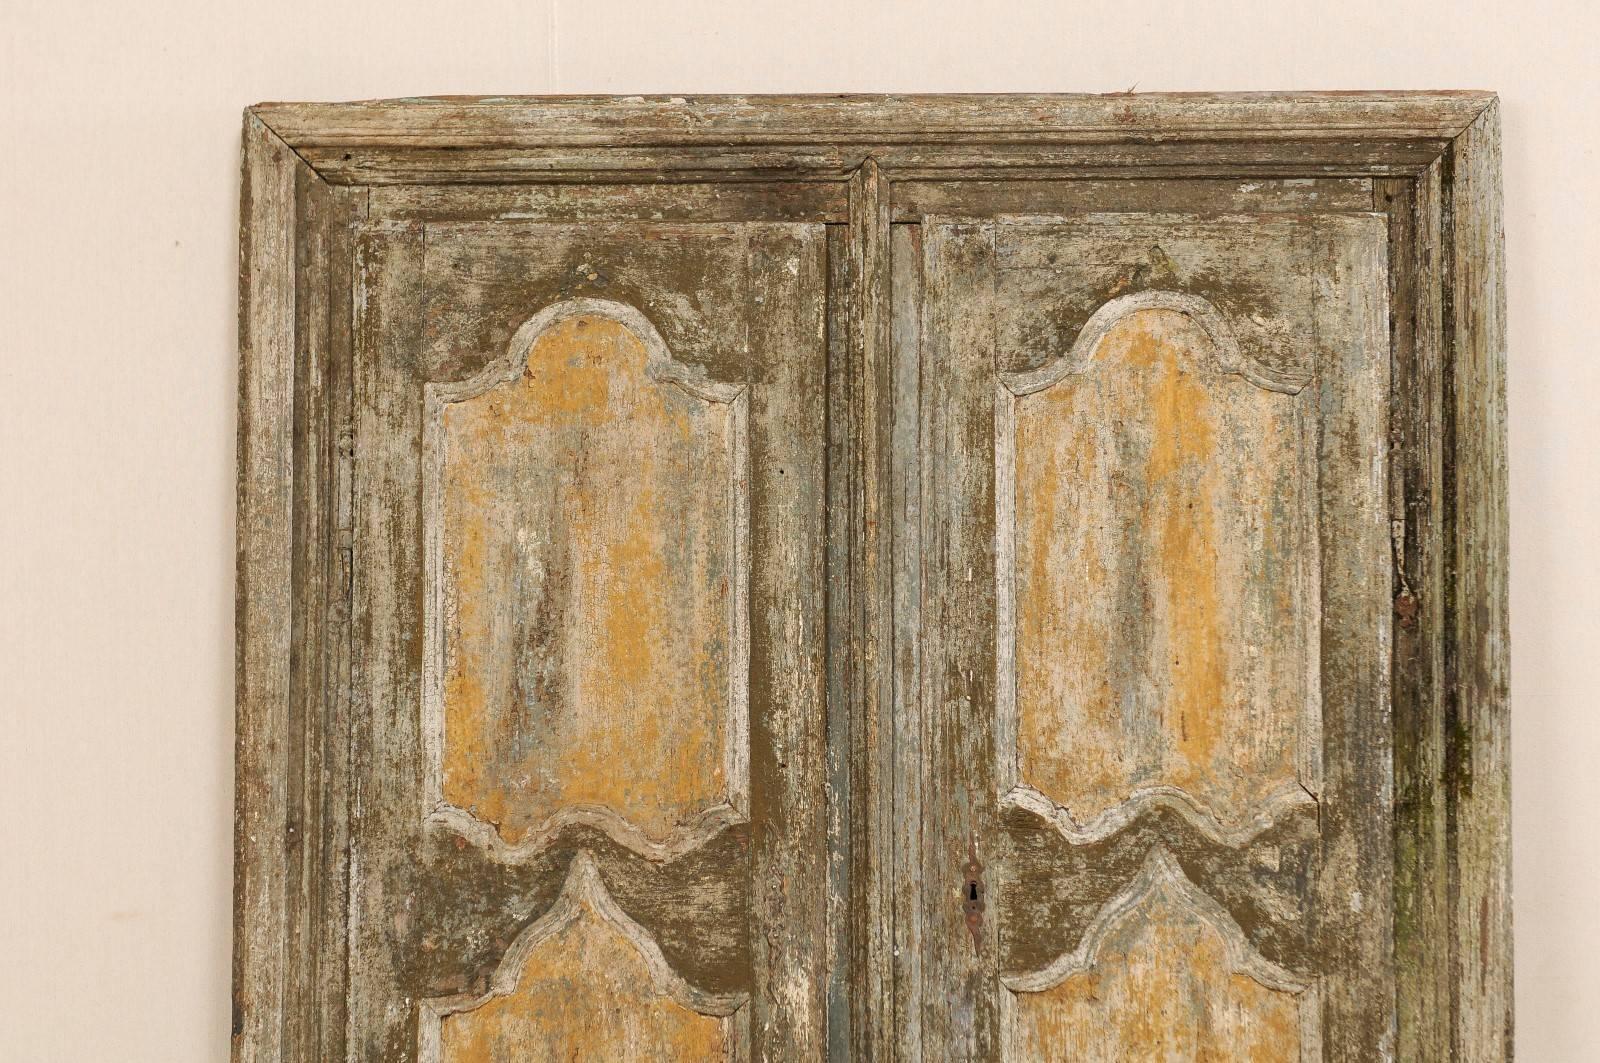 A pair of 18th century Italian doors within their original casing. This pair of Italian doors and casing from the 18th century feature door fronts beautifully decorated with carved and painted recessed panels. The panels have curvaceous tops and